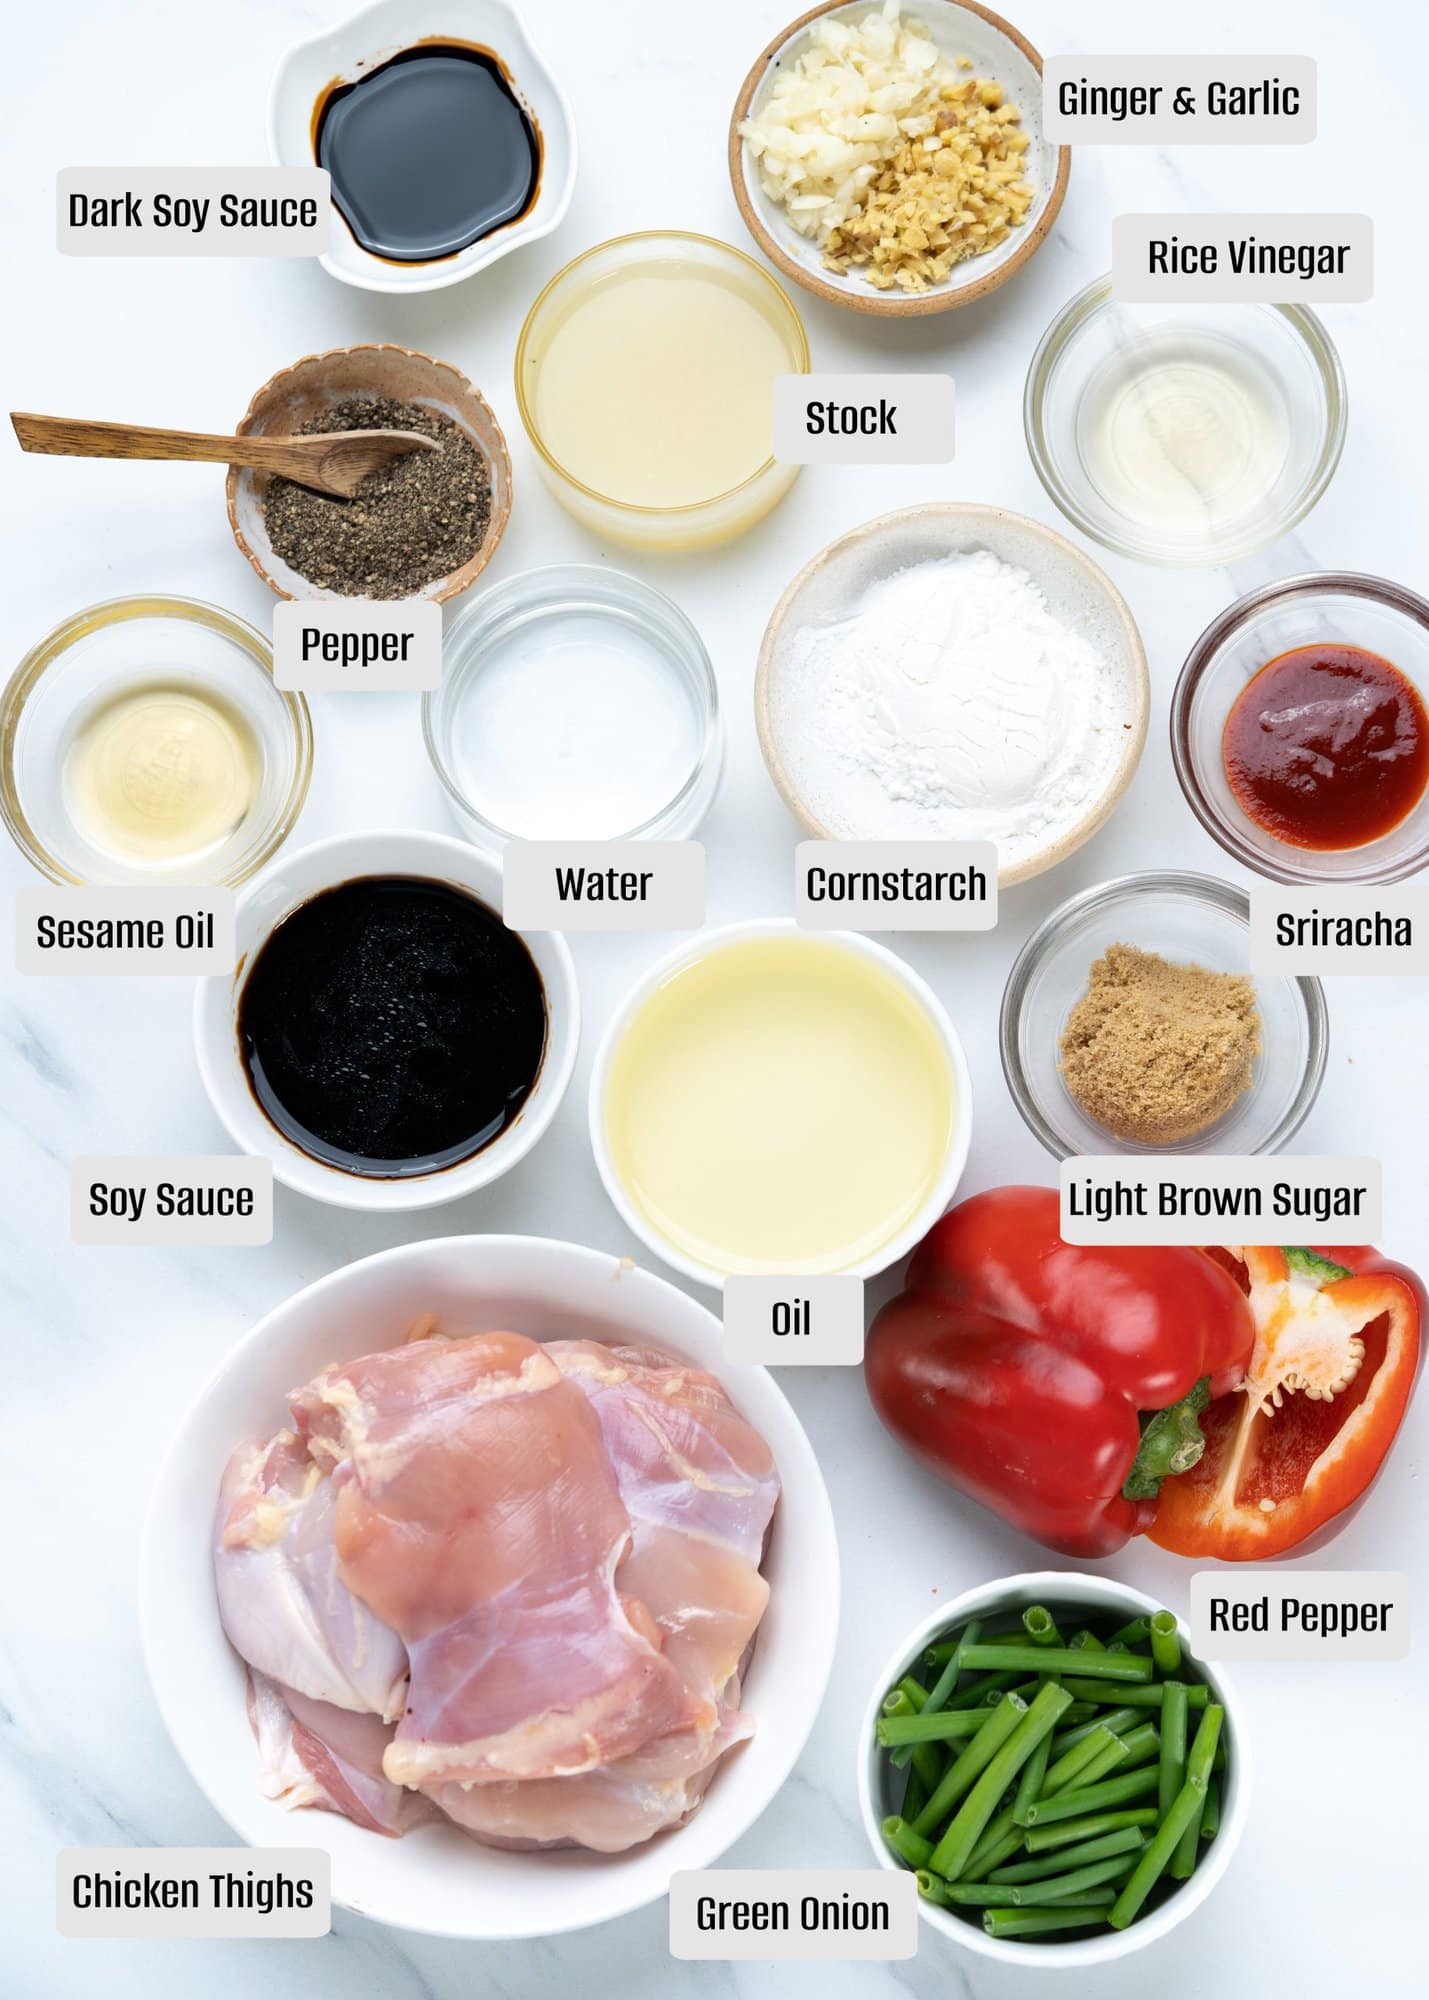 Ingredients required to make the Chinese chicken stir fry and Chinese soy-based sauce